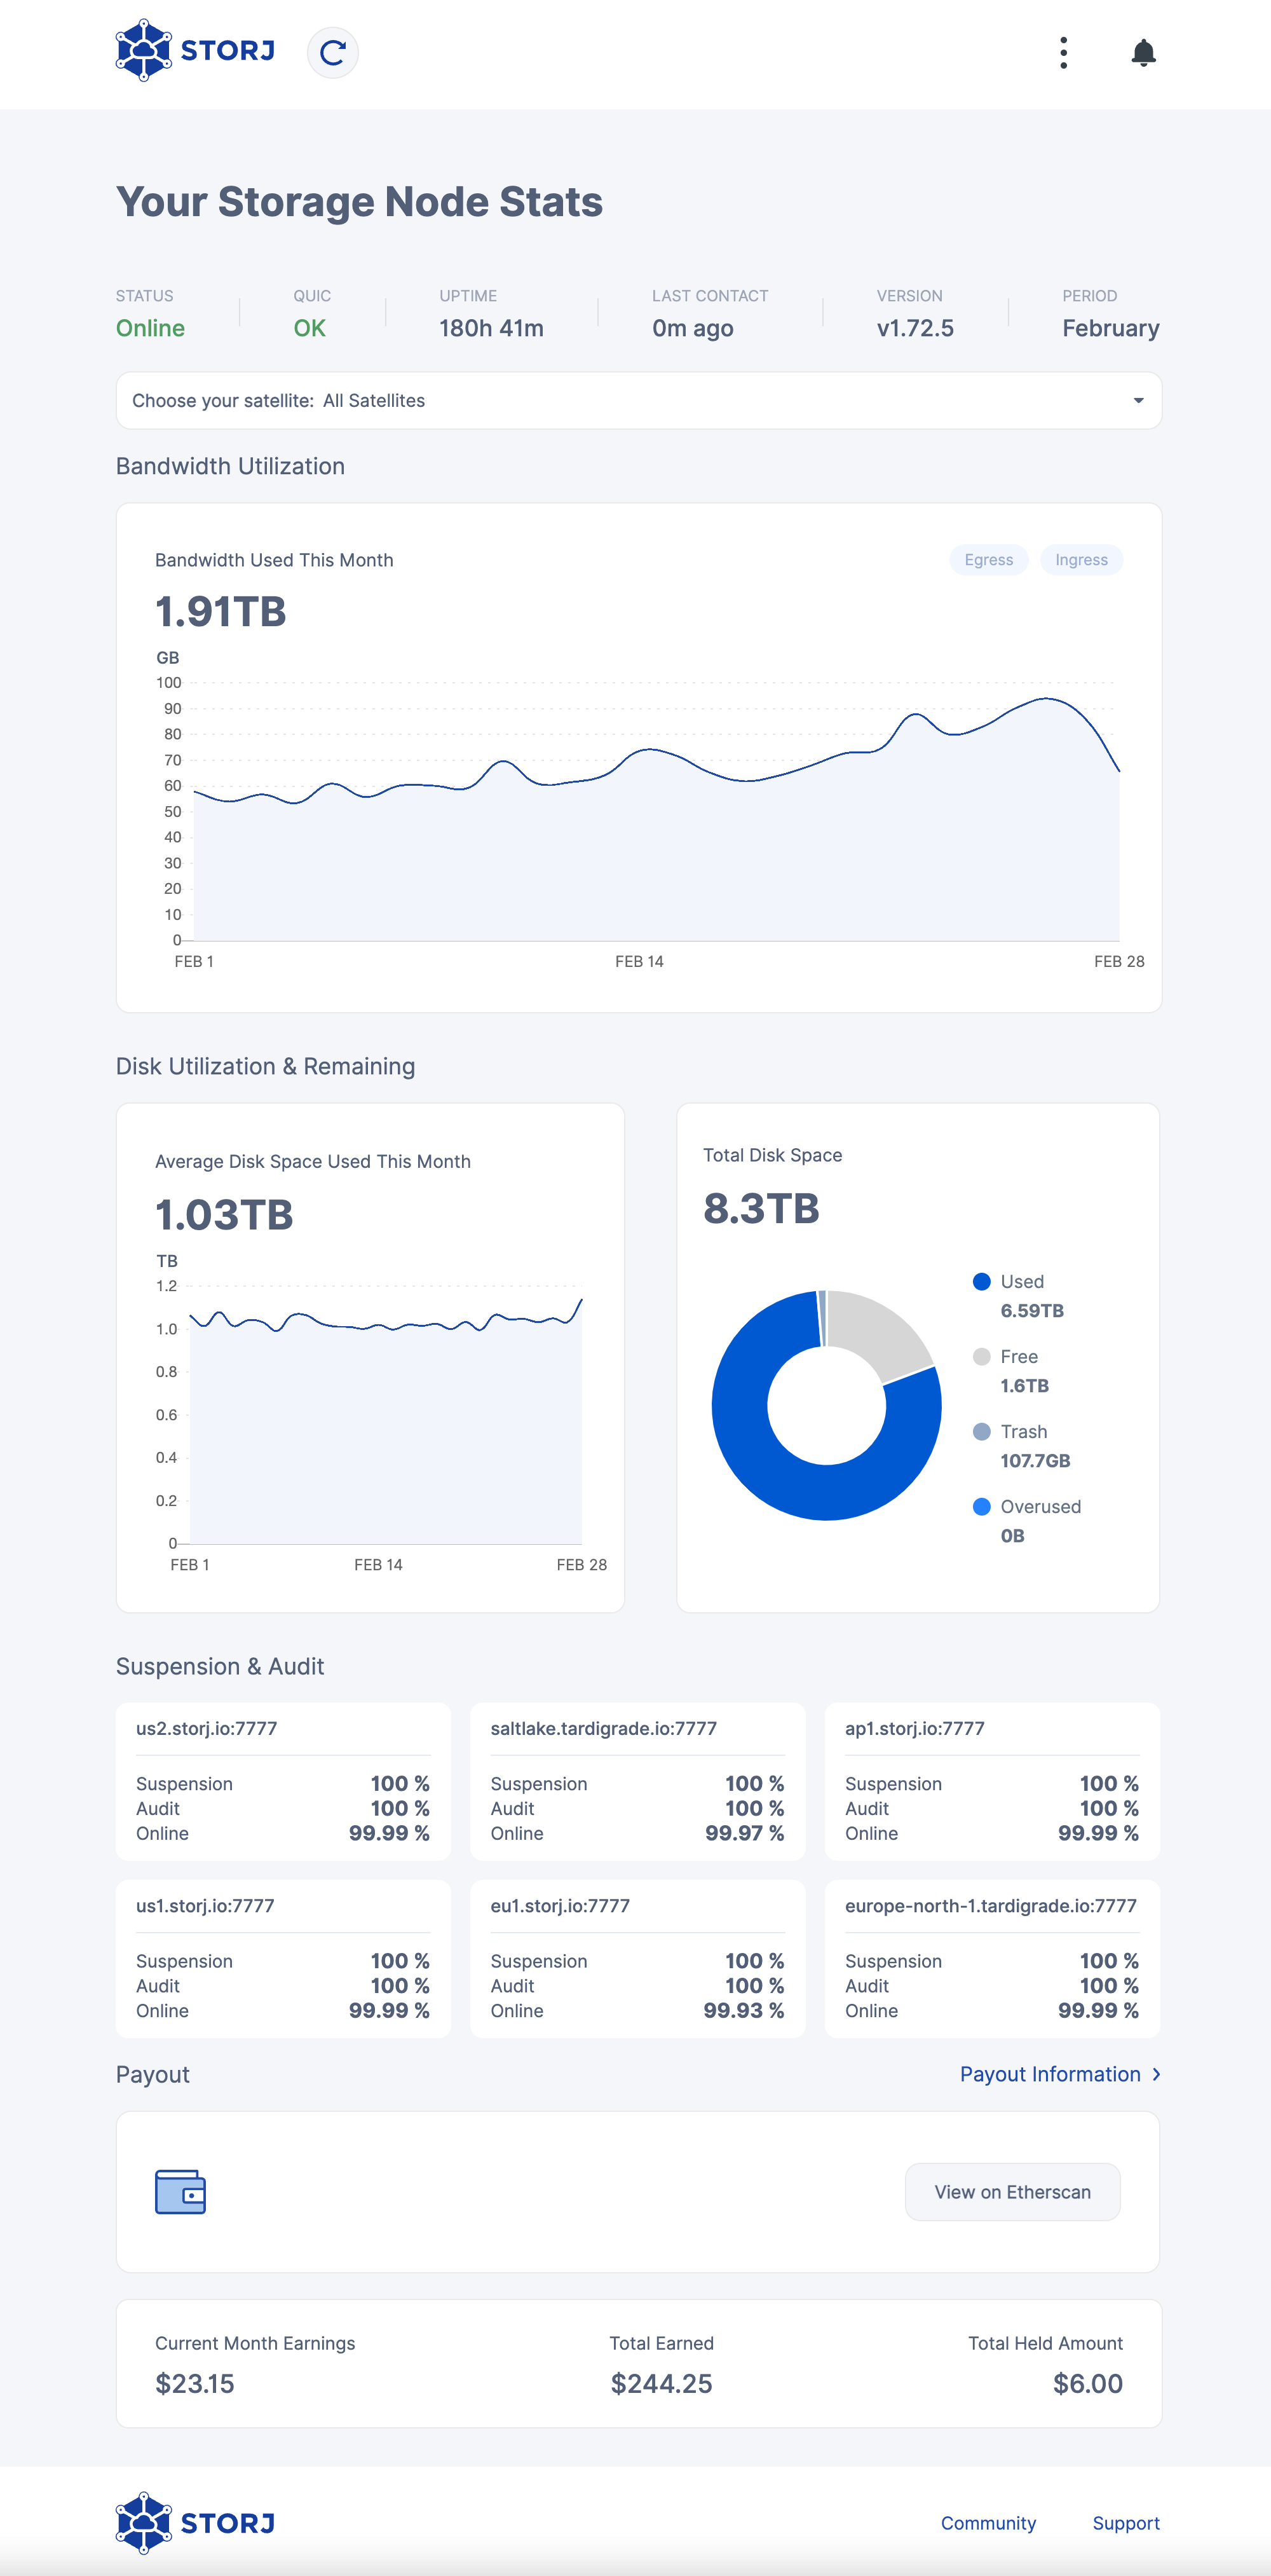 Storj Dashboard end of February 2023. Bandwidth used: 1.91 TB. Average storage space used per day: 1.03 TB. Total available storage: 8.3 TB. Used storage: 6.59 TB. Free disk space: 1.6 TB. Recycle bin: 107.7 GB. Earnings this month: $23.15. Total earnings: $244.25. Withheld earnings: $6.